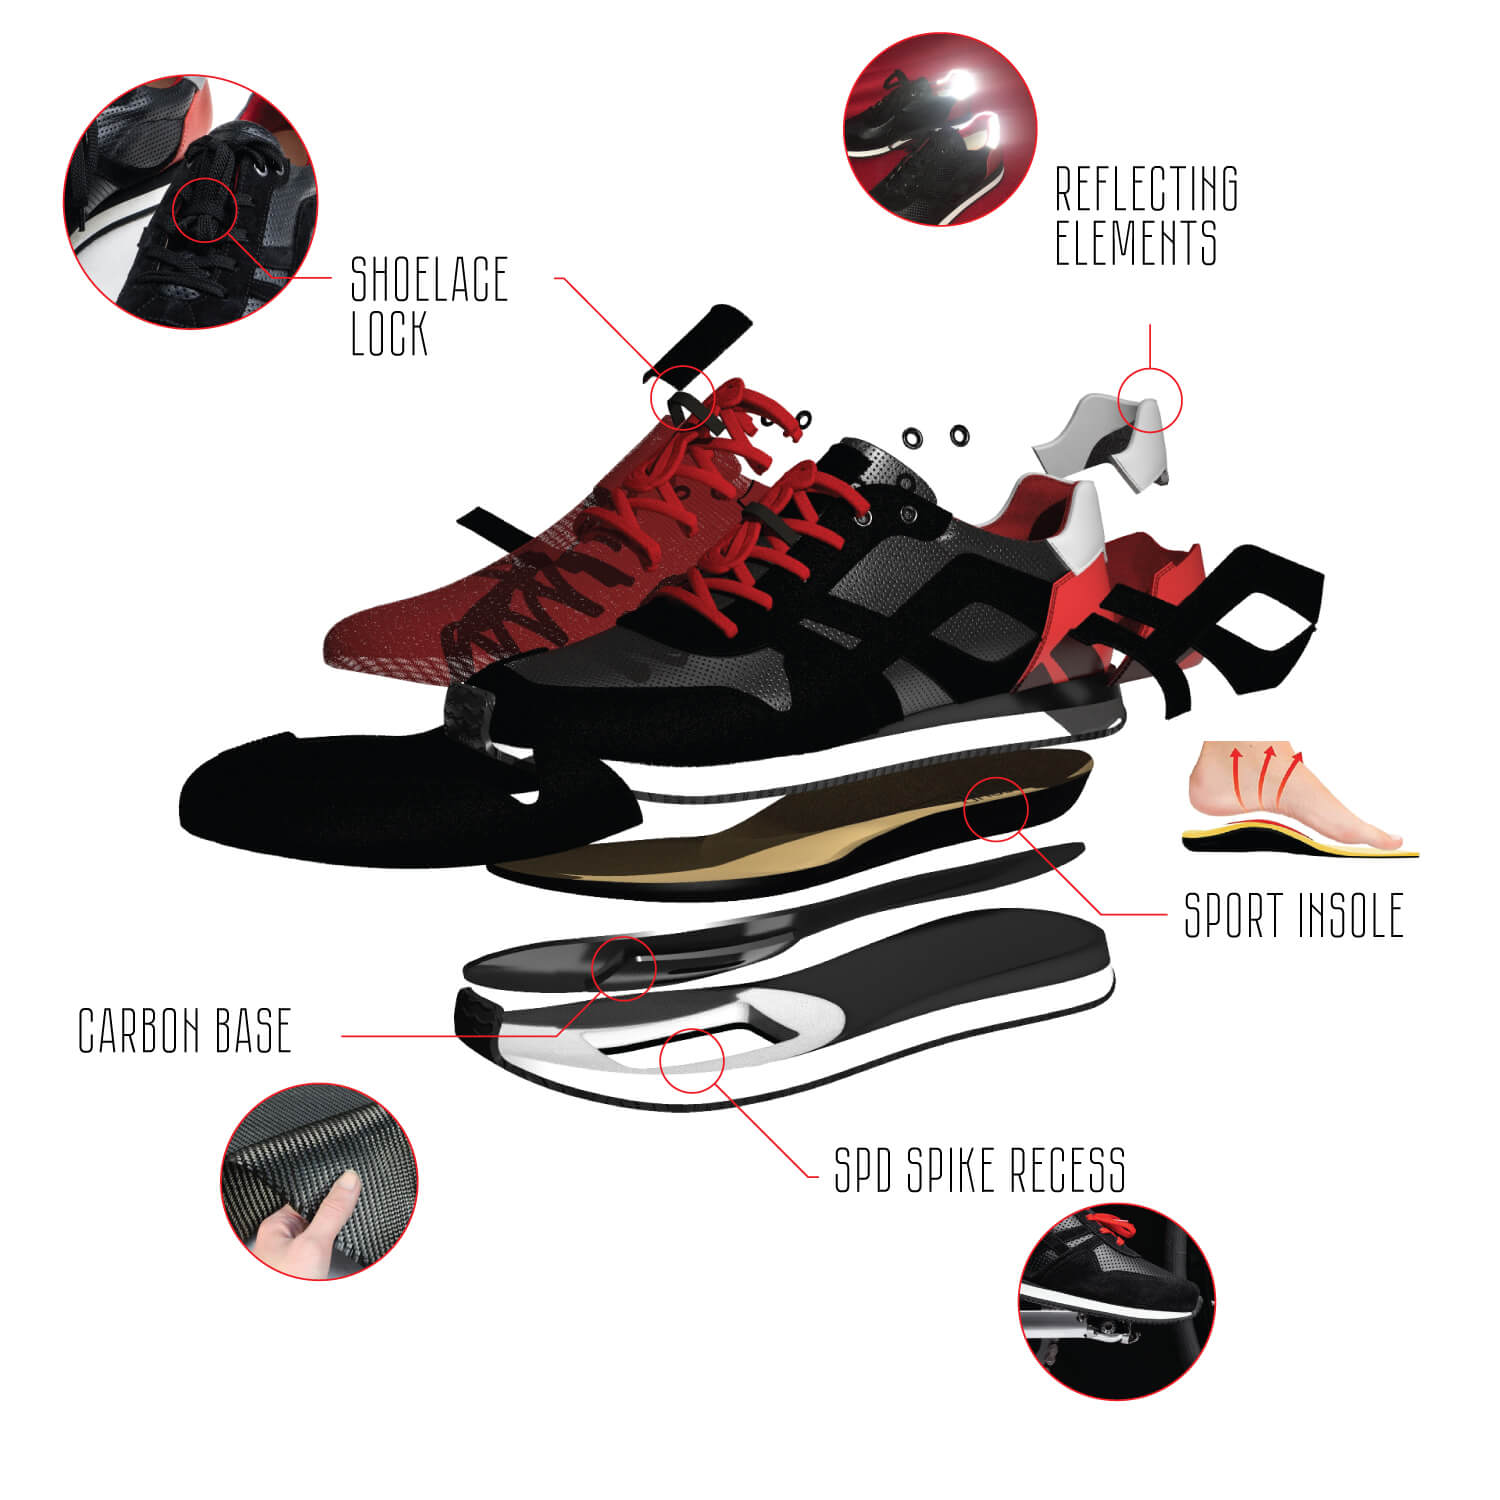 How AFOUR Cycling shoes SPDs are built